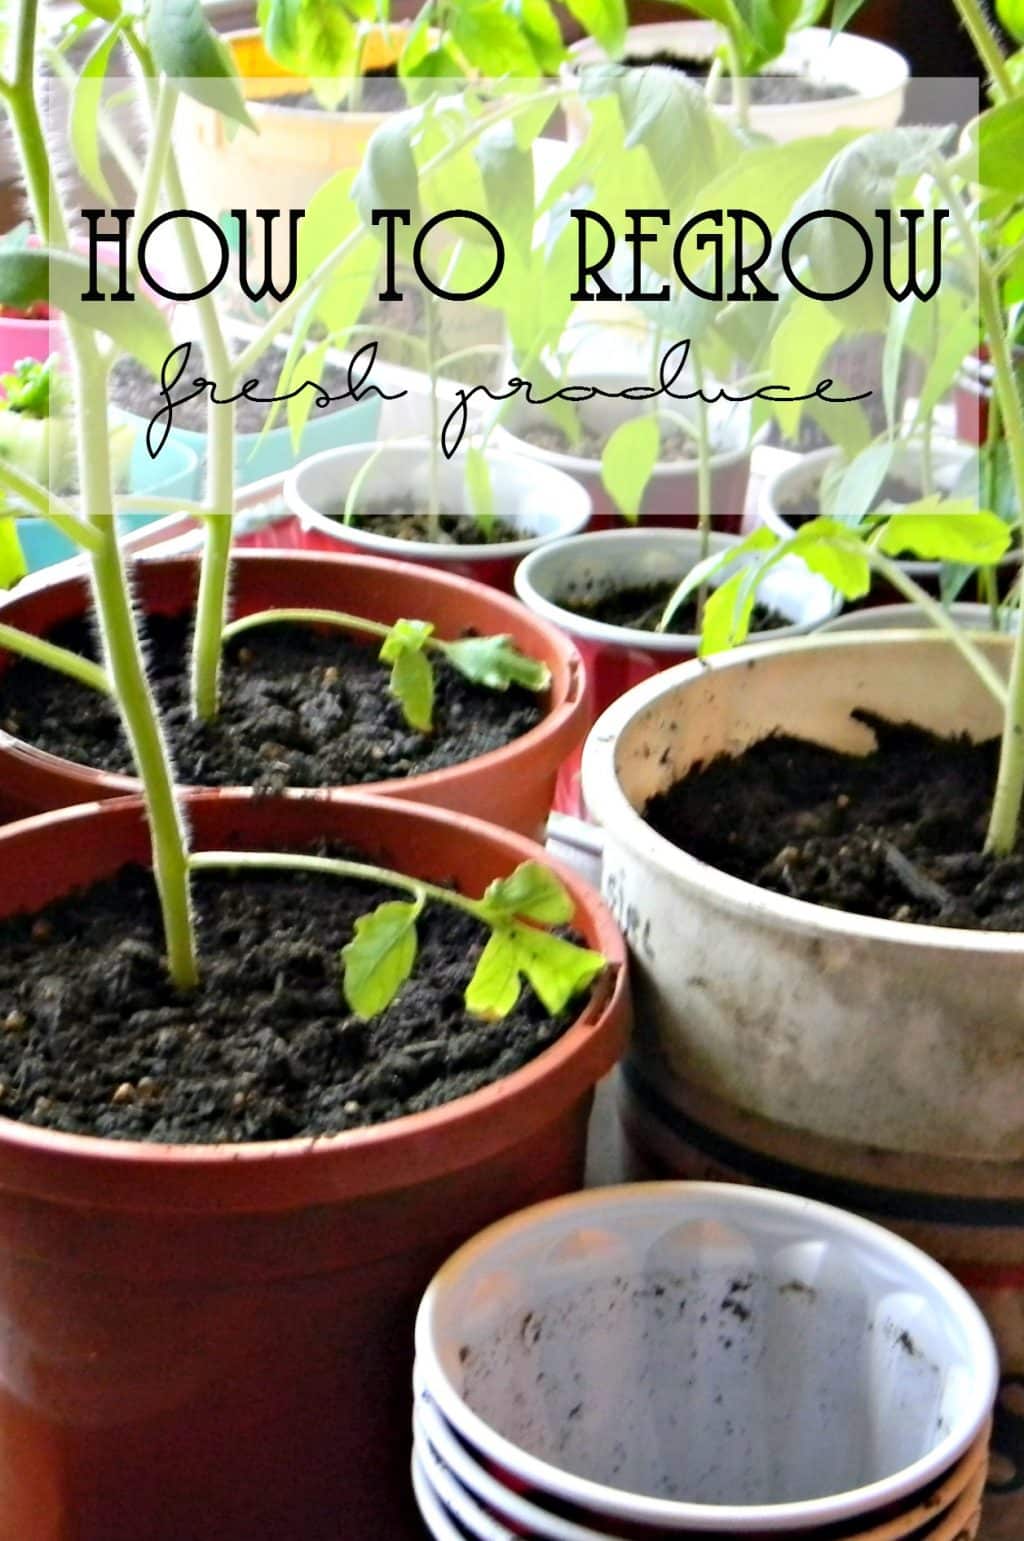 How To Regrow Fresh Produce